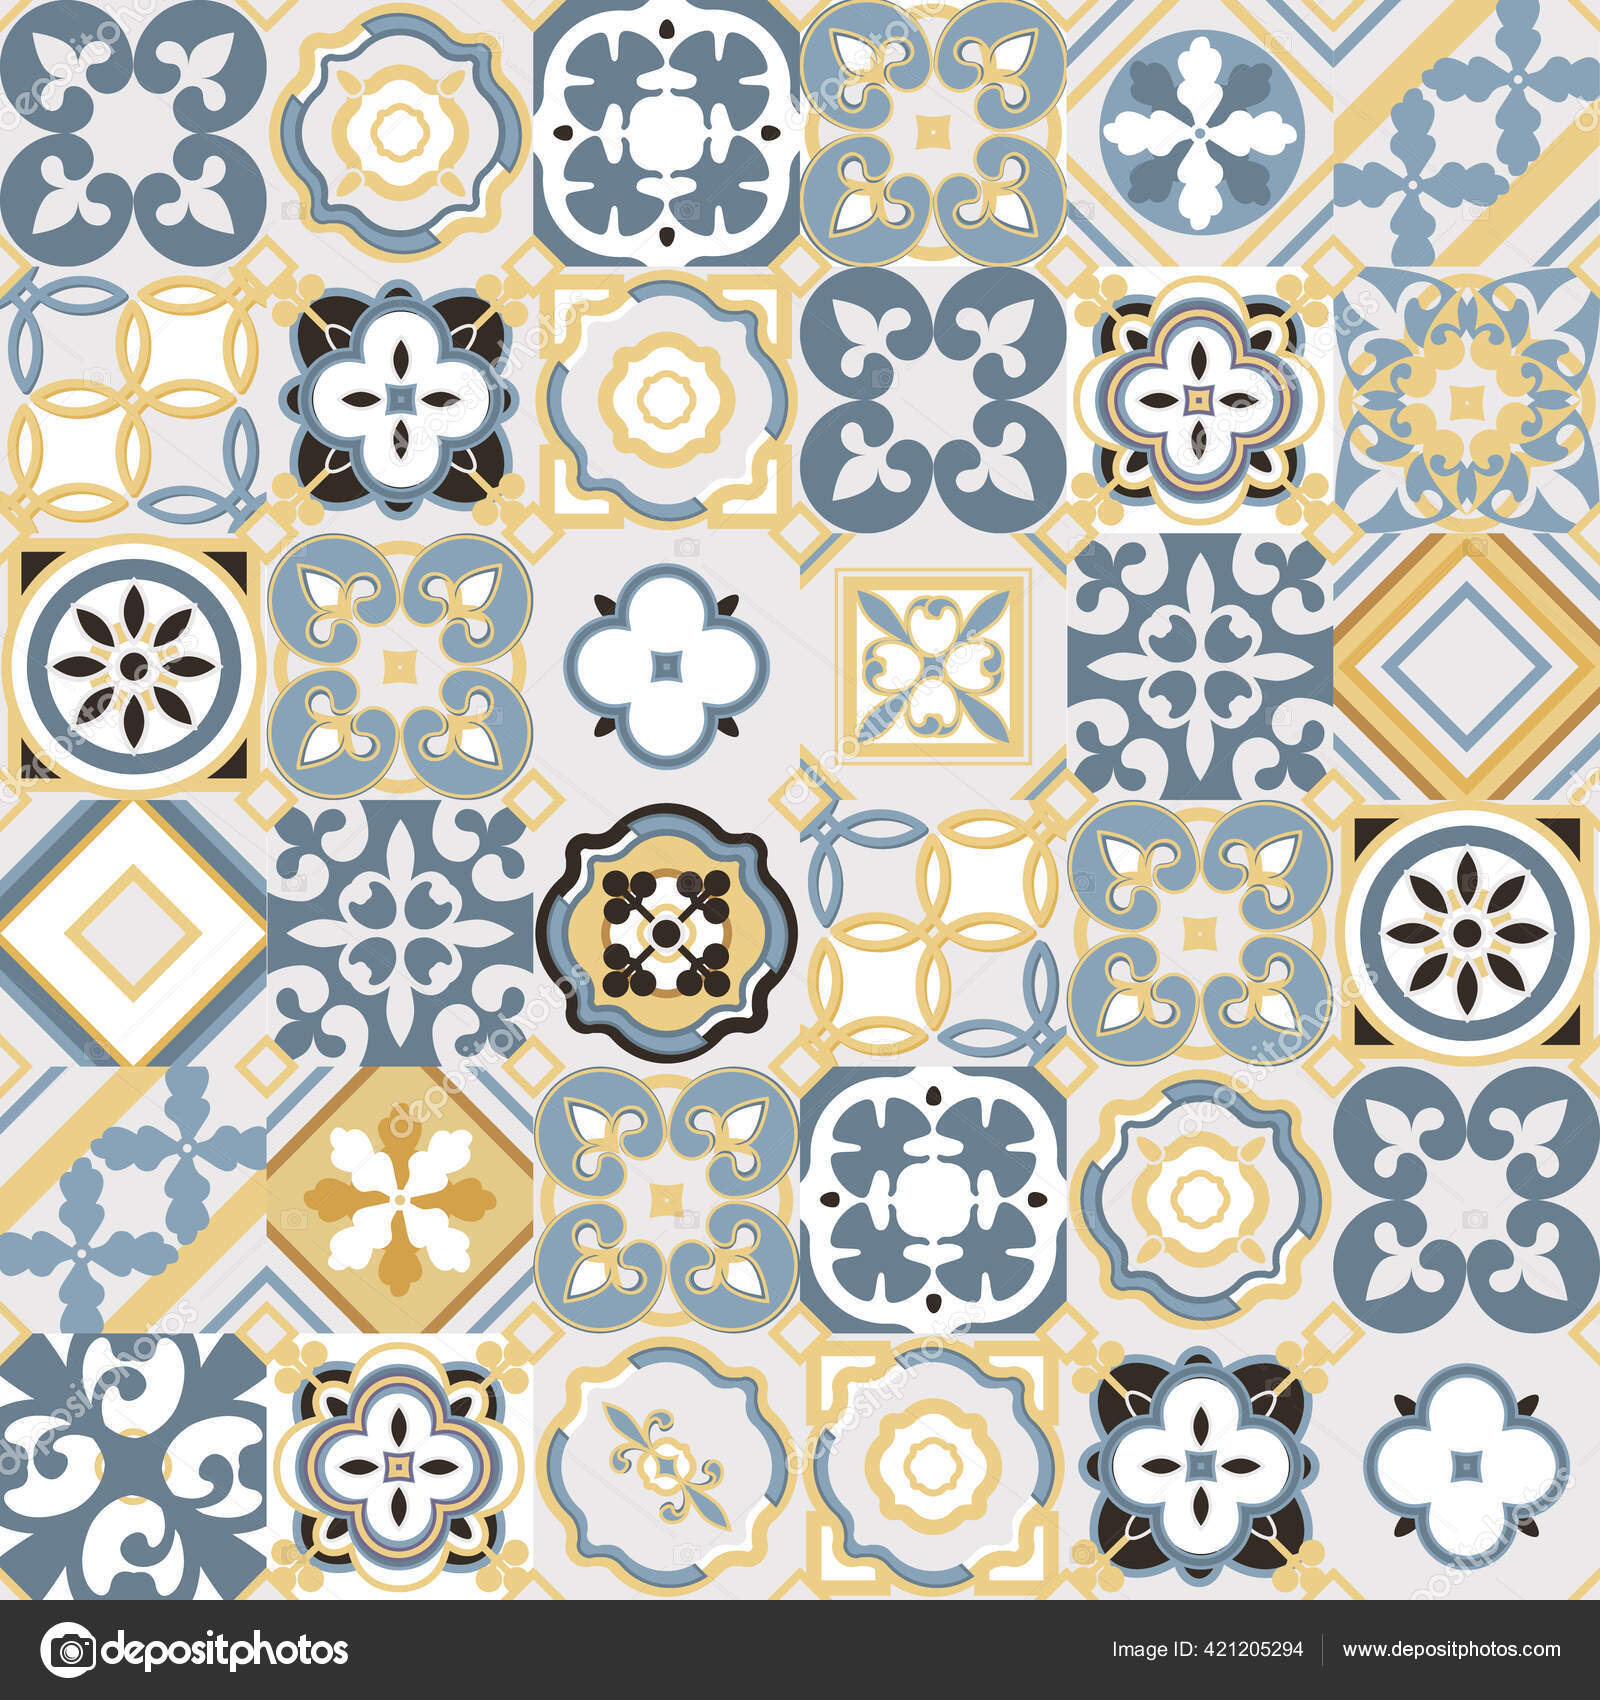 Vintage Seamless Tile Pattern Morocco, How To Design A Mosaic Tile Pattern